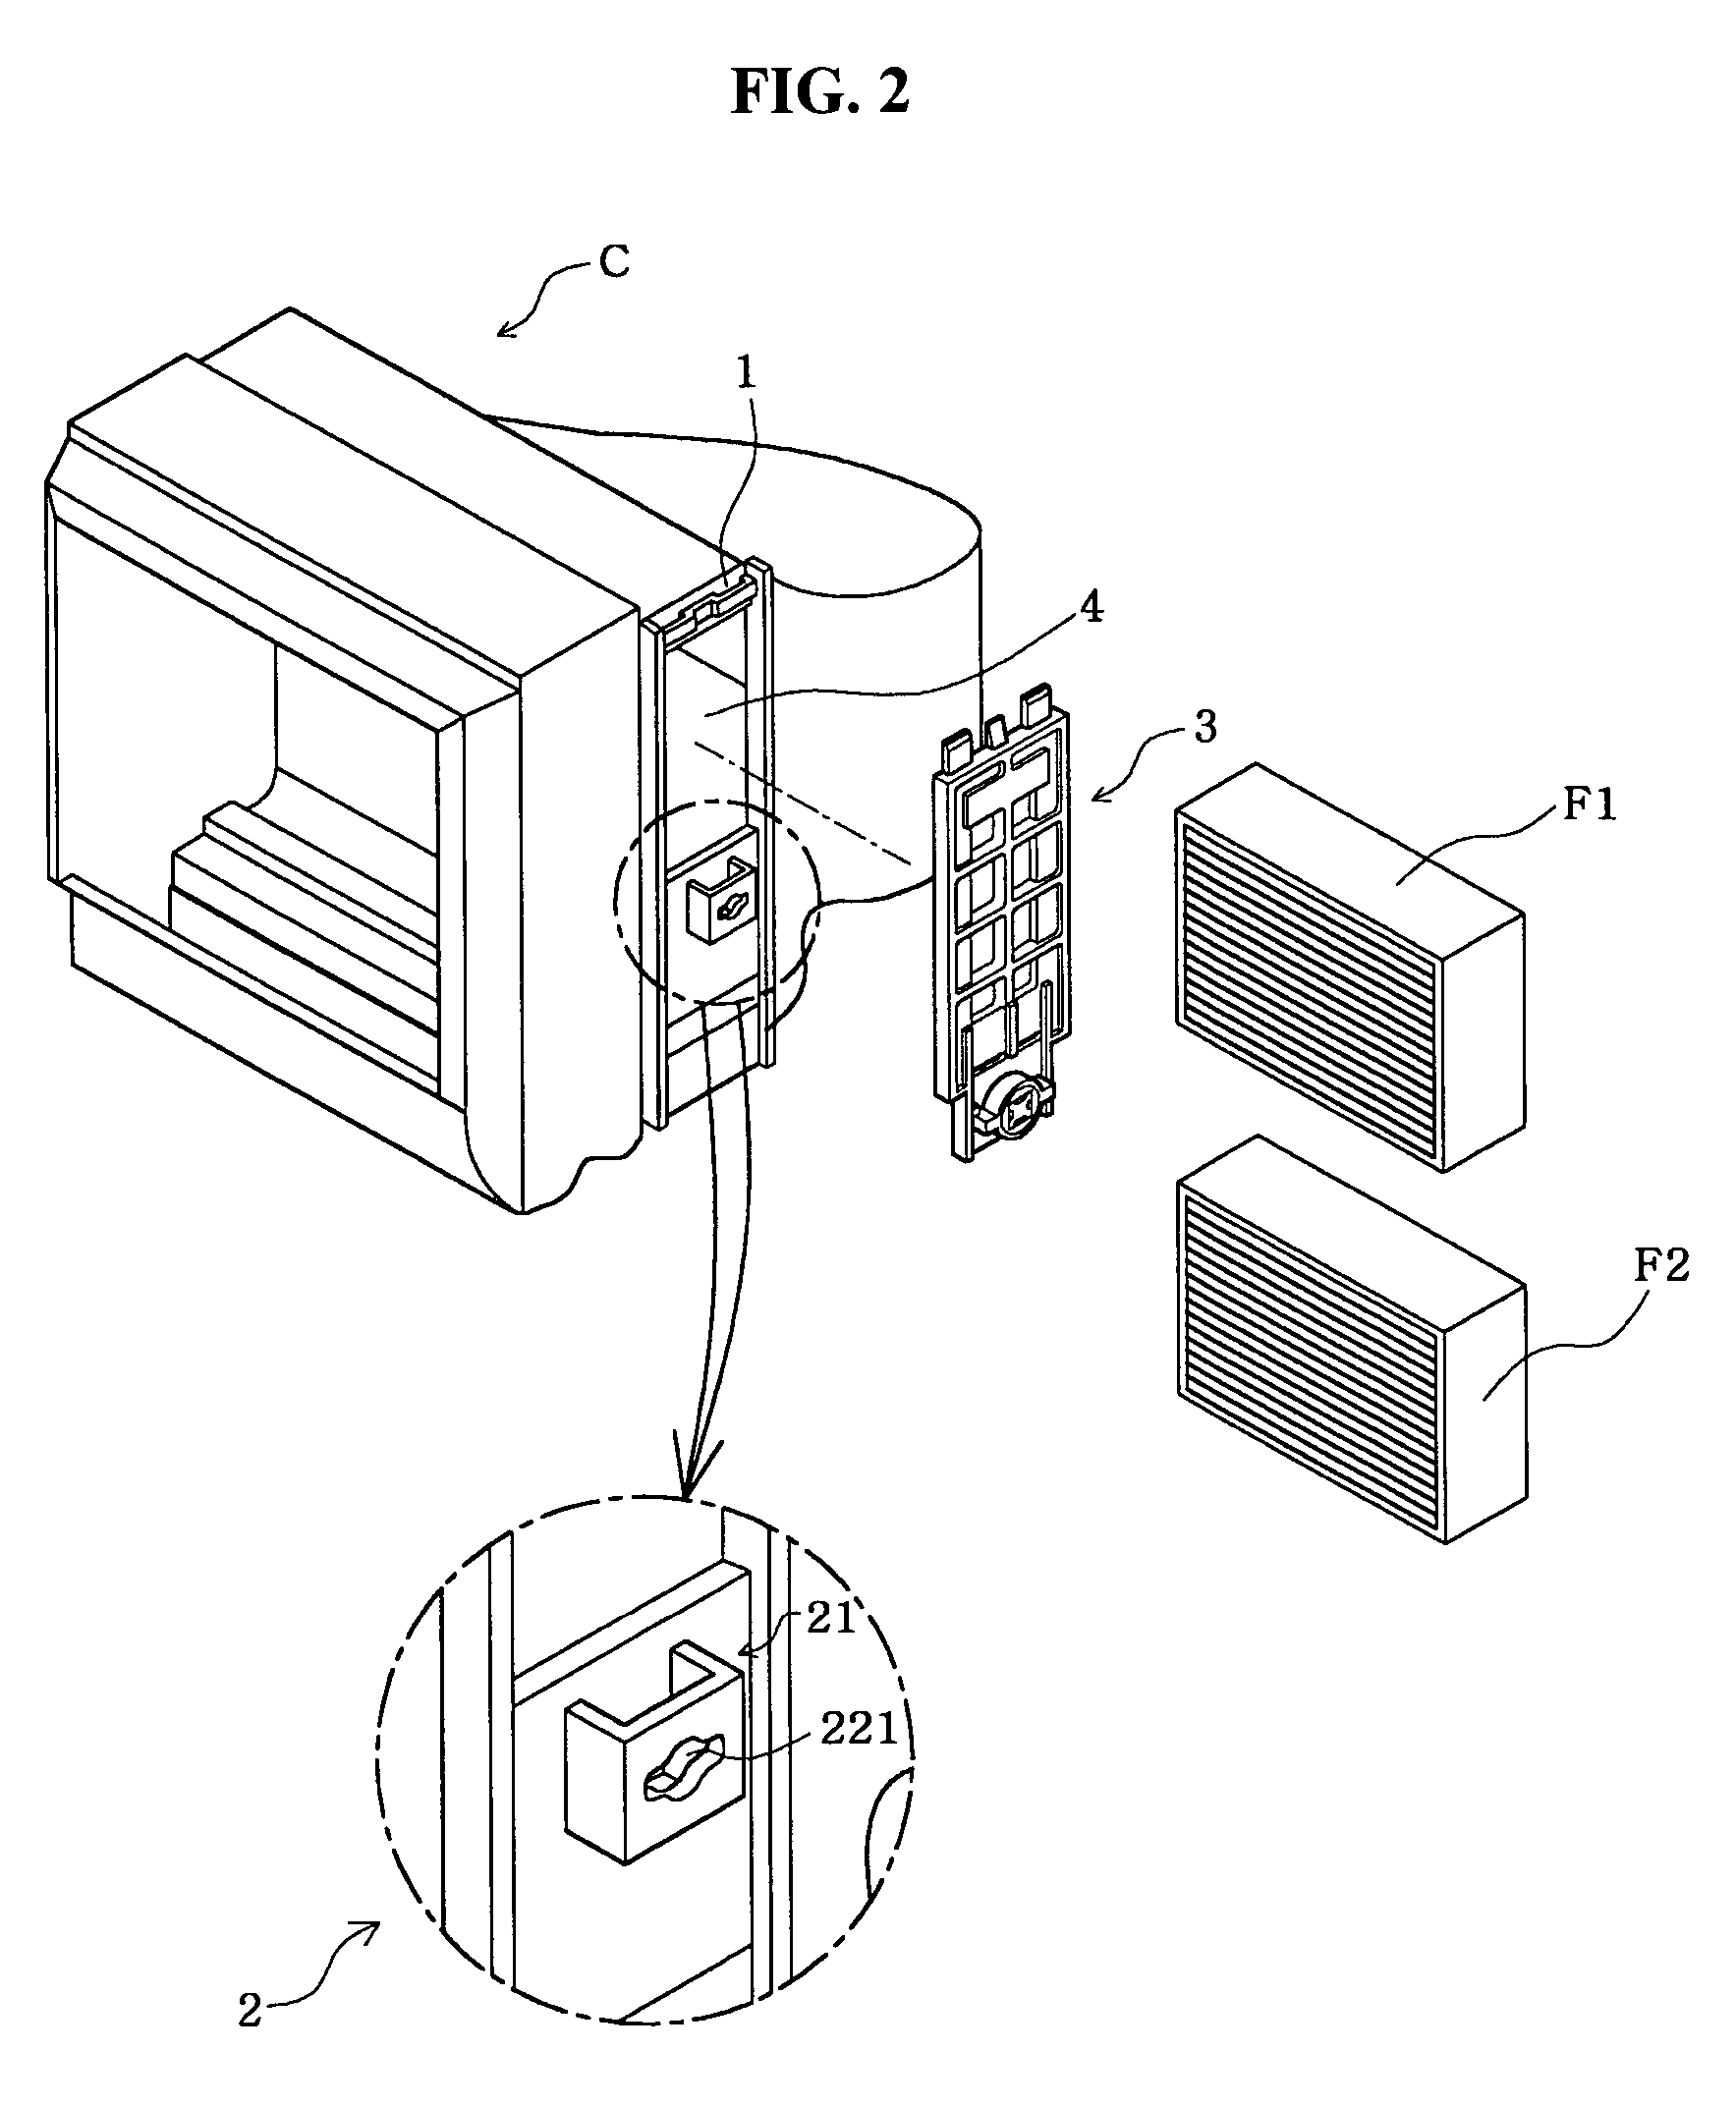 Filter cover assembly for an air conditioning unit